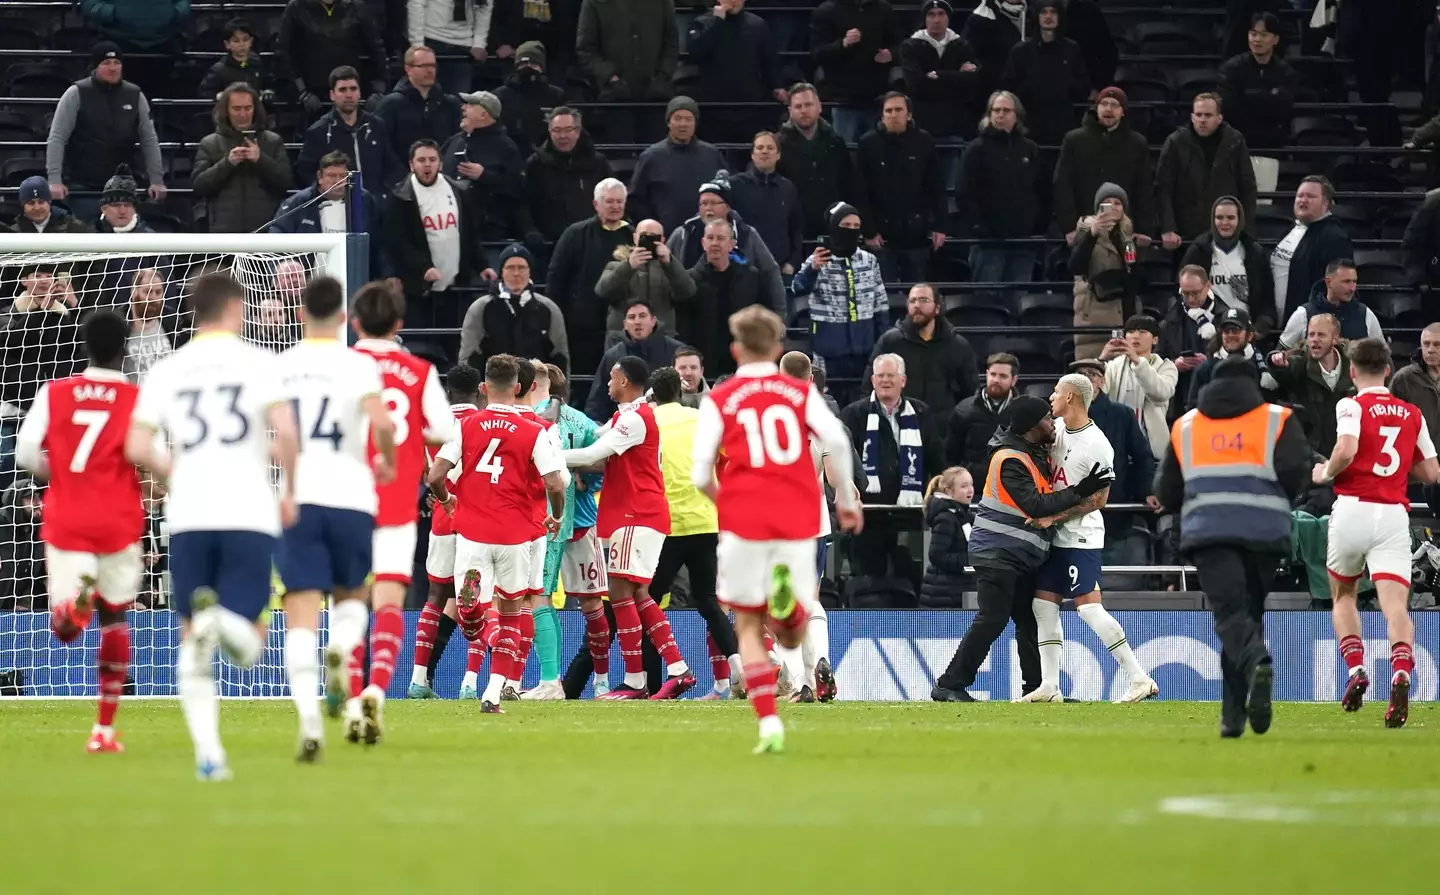 Arsenal players approach Ramsdale following the incident. (Image